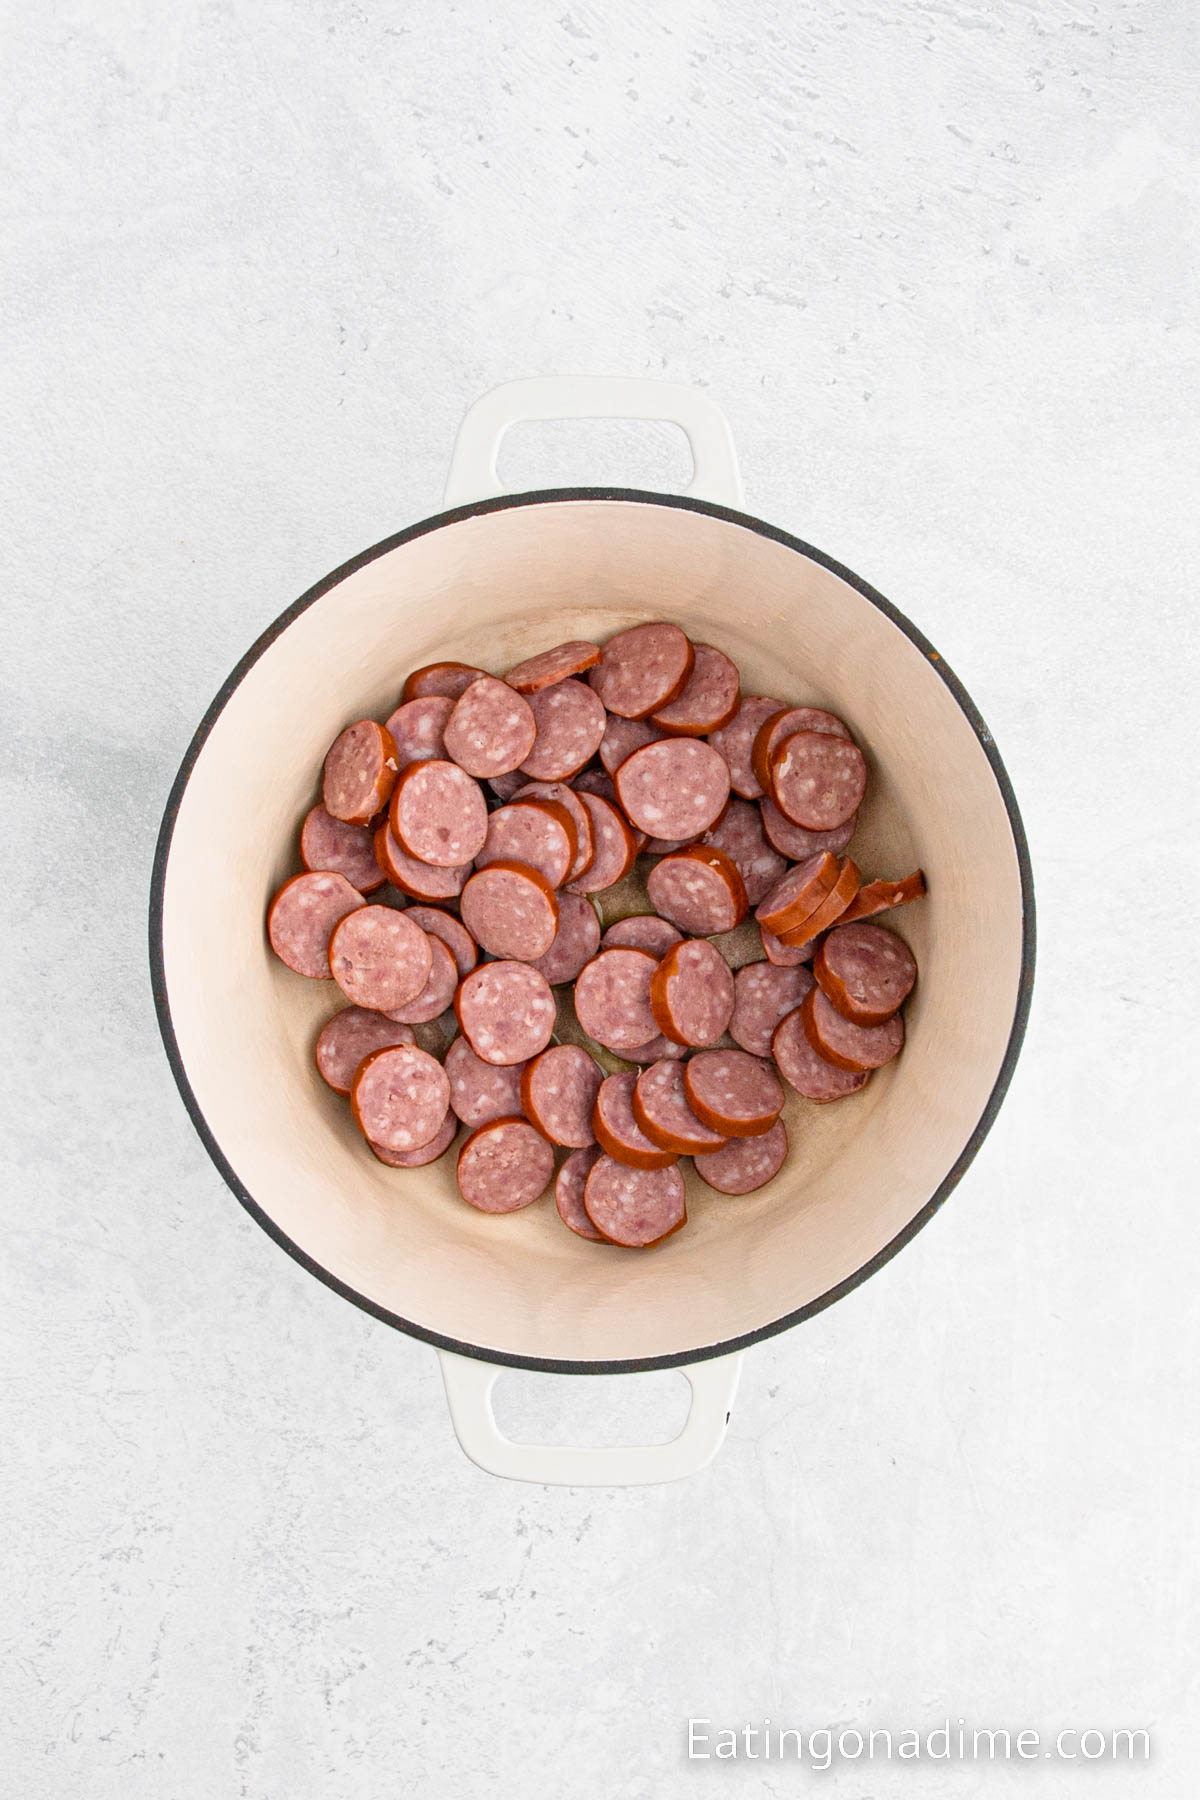 Cooking sausage in the skillet